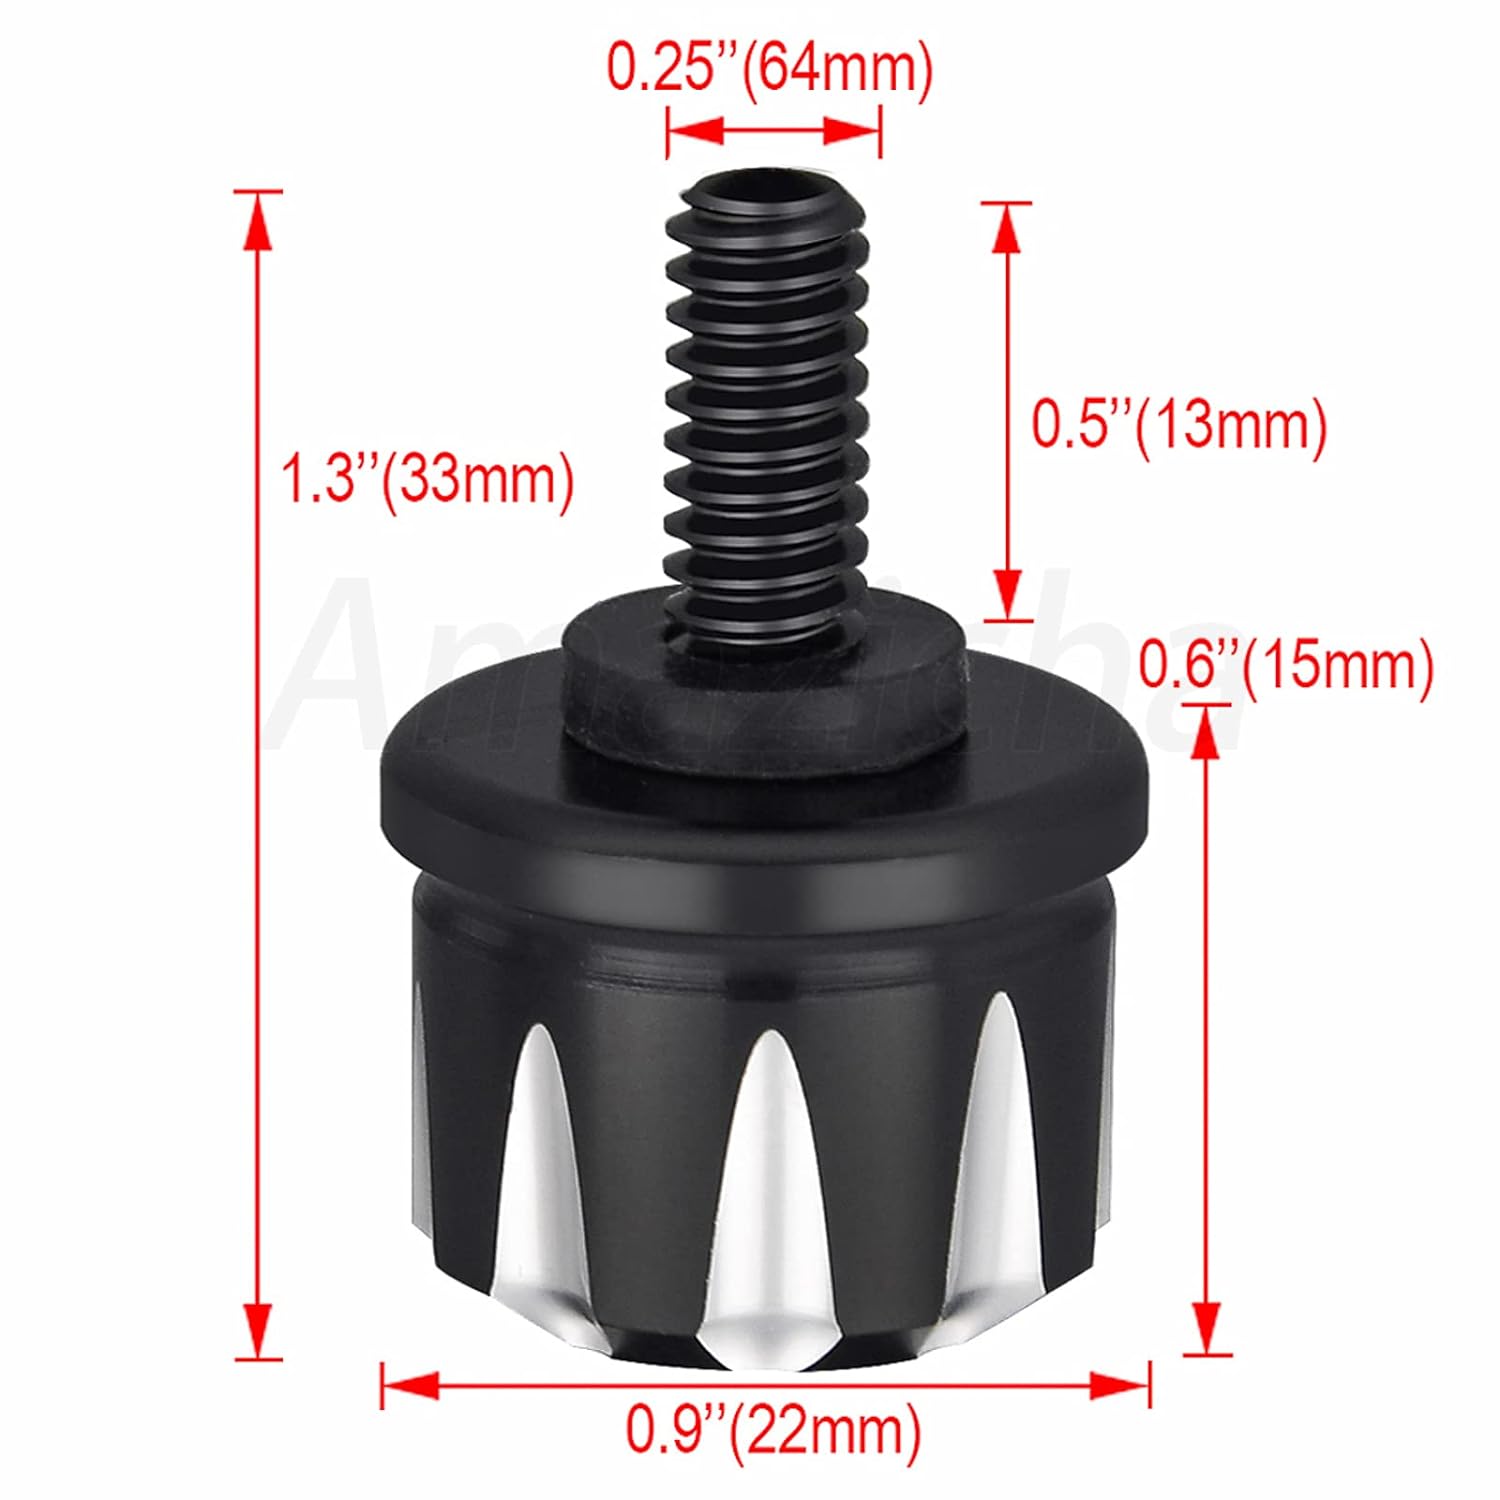 Amazicha Black Seat Bolt Screw Stainless Steel Compatible for Harley Davidson Seat with 1/4-20 Thread - Amazicha Black Seat Bolt Screw Stainless Steel Compatible Review